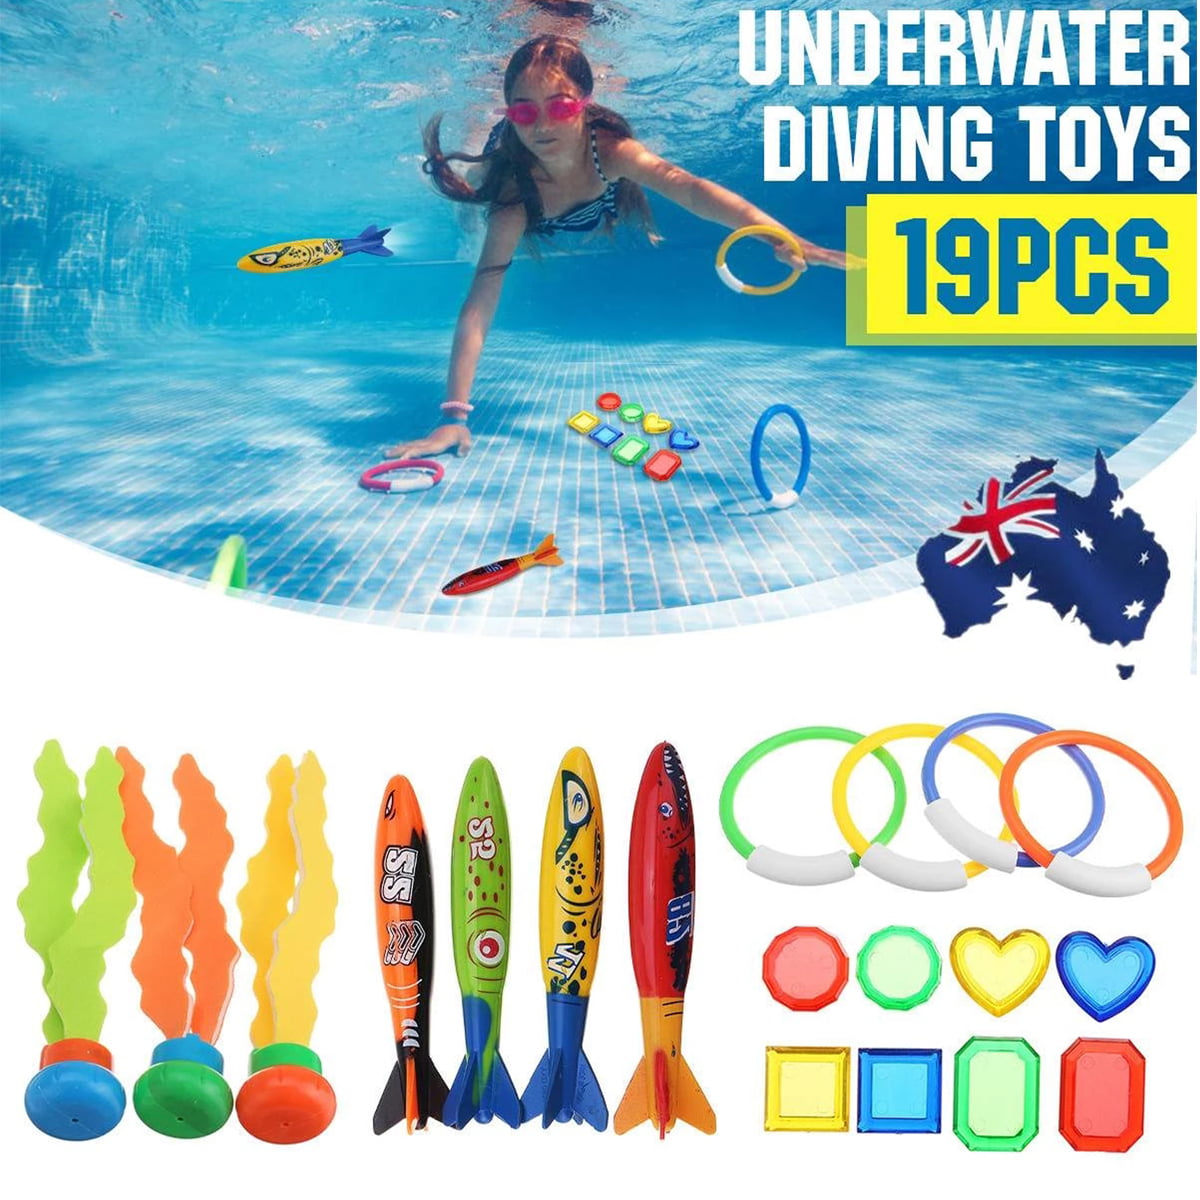 Details about   19pcs Swimming Pool Throwing Diving Toys Underwater Rings Diving Circle Se I 